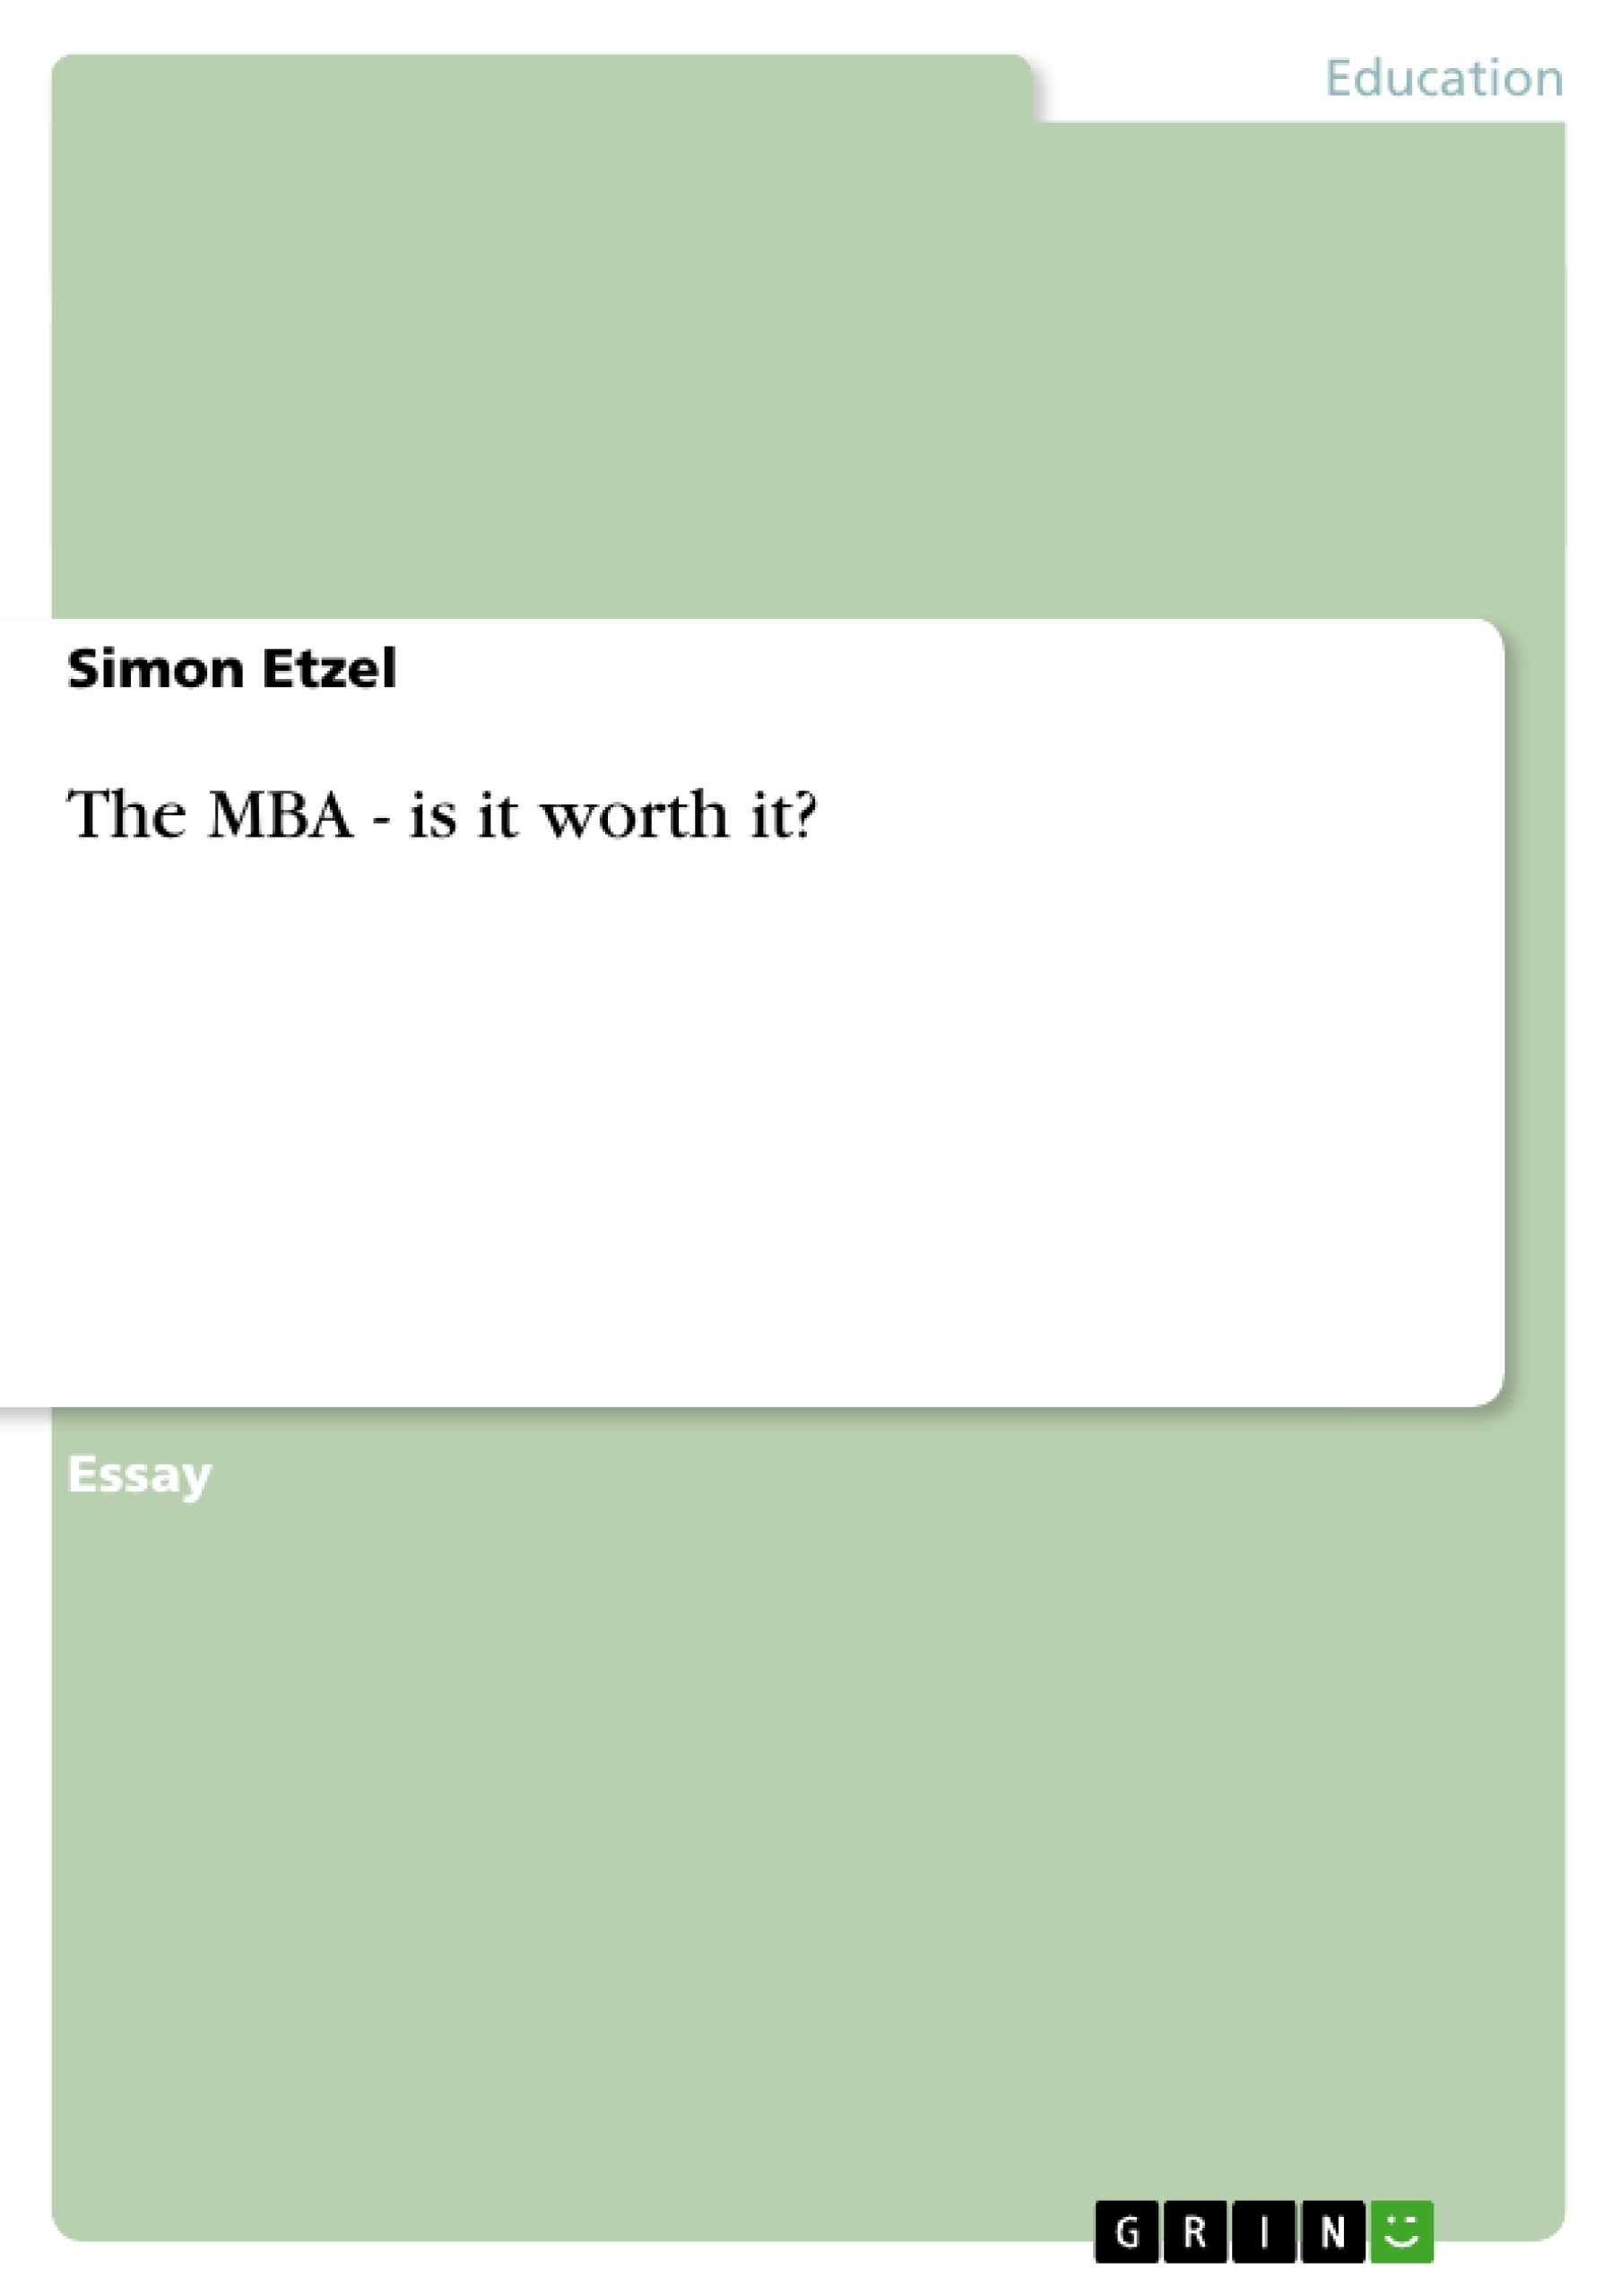 Title: The MBA - is it worth it?